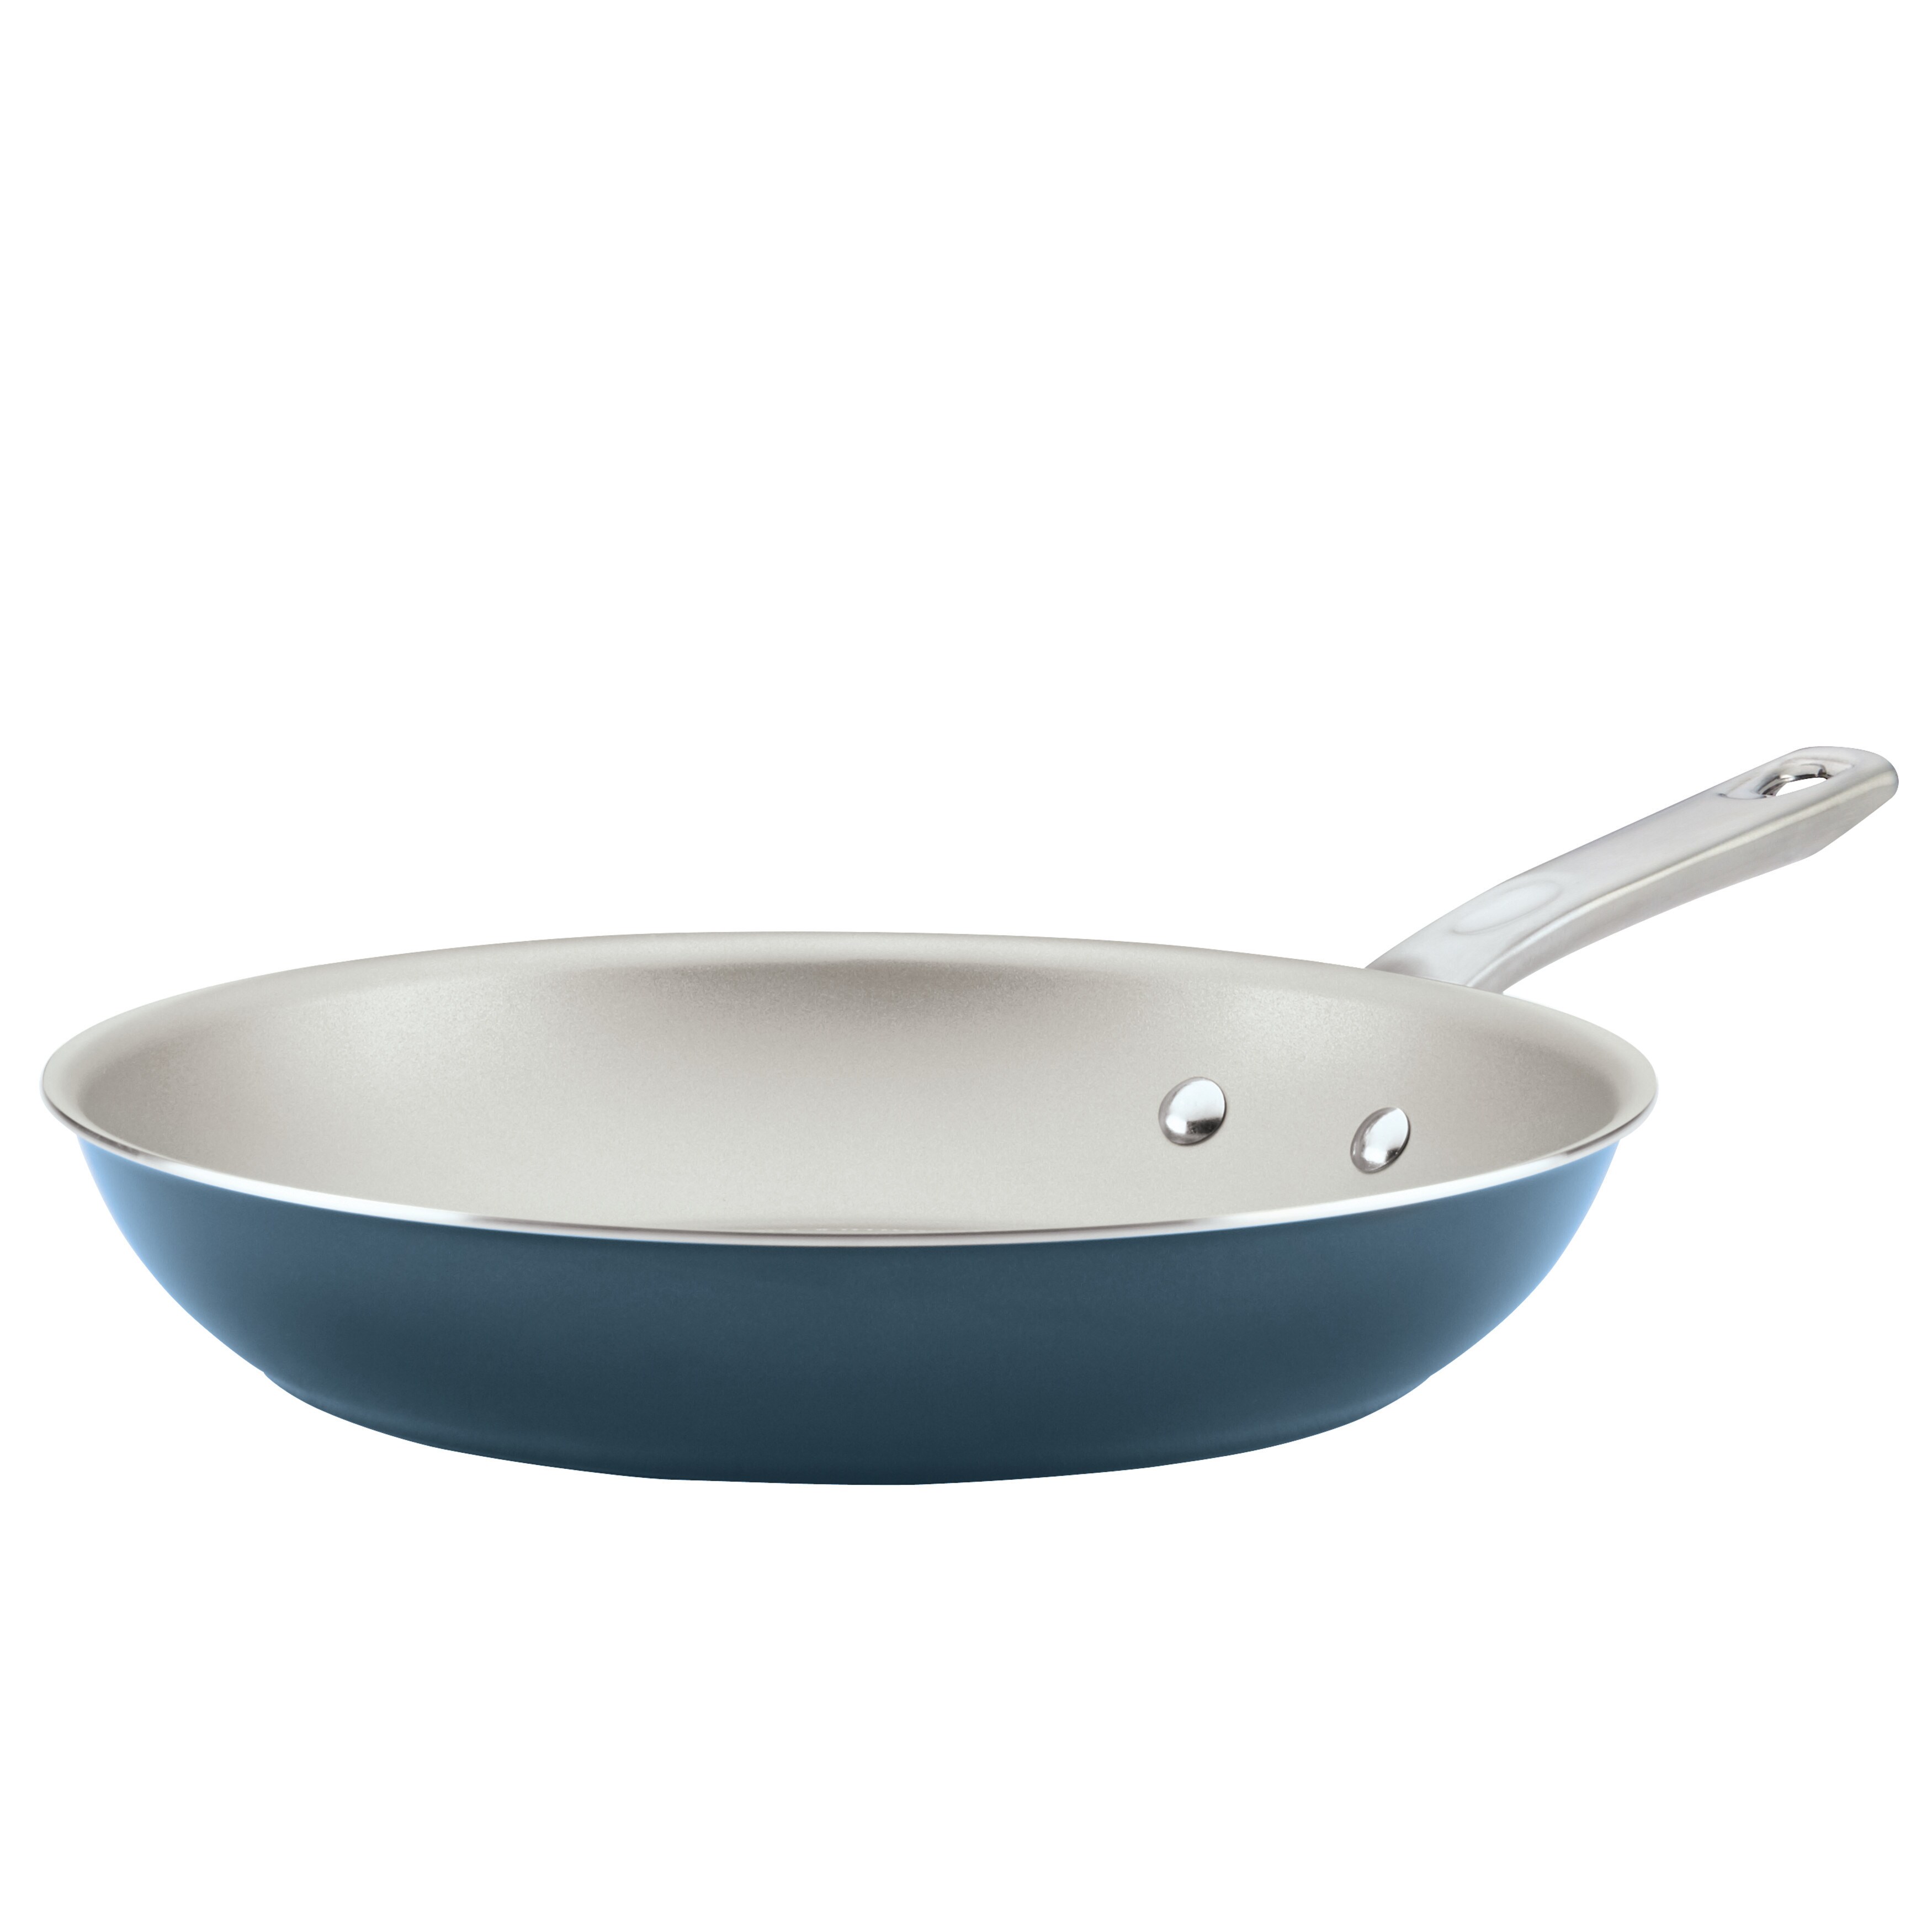 Ayesha Curry Home Collection Porcelain Enamel Nonstick Frying Pan, 10-Inch,  Brown Sugar - Bed Bath & Beyond - 20005403